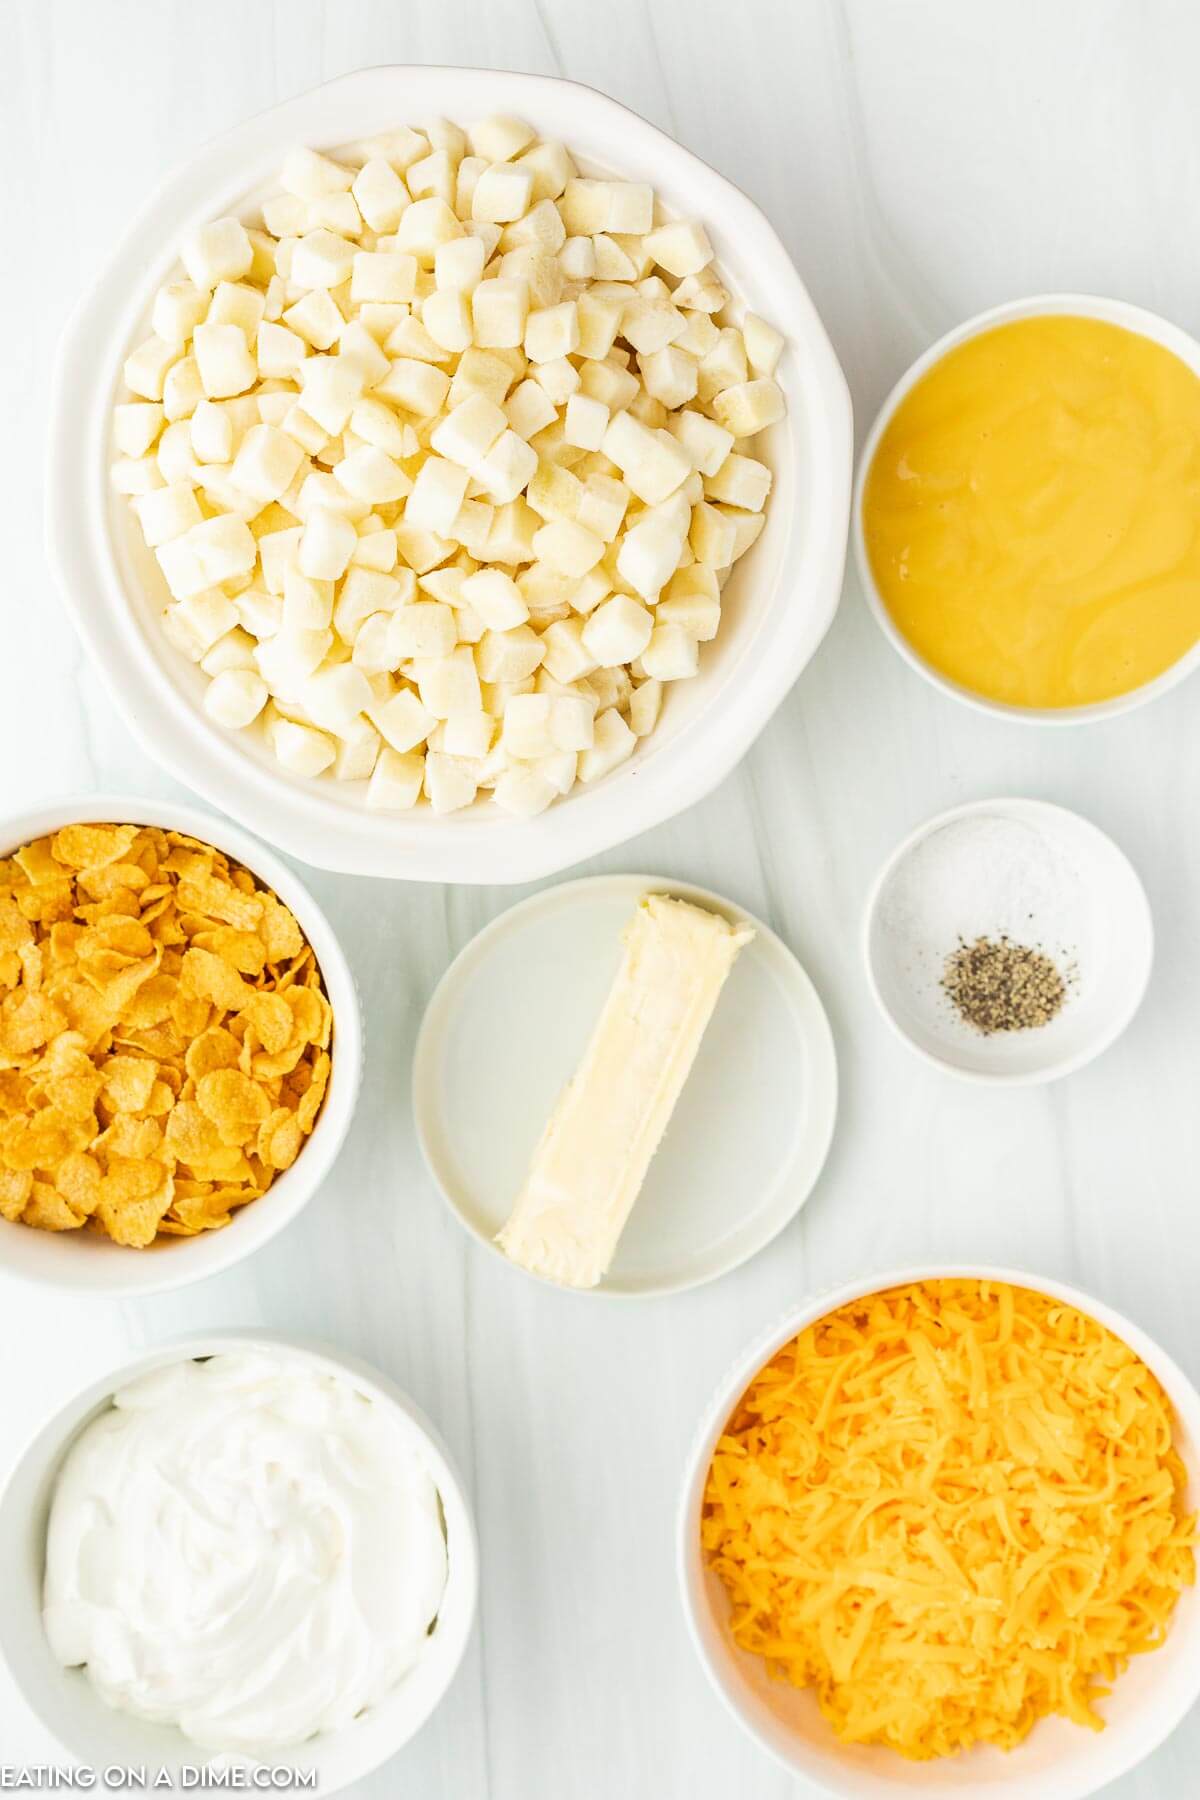 Ingredients needed - hash browns, sour cream, cream of chicken soup, butter, cheddar cheese, salt, pepper, corn flakes